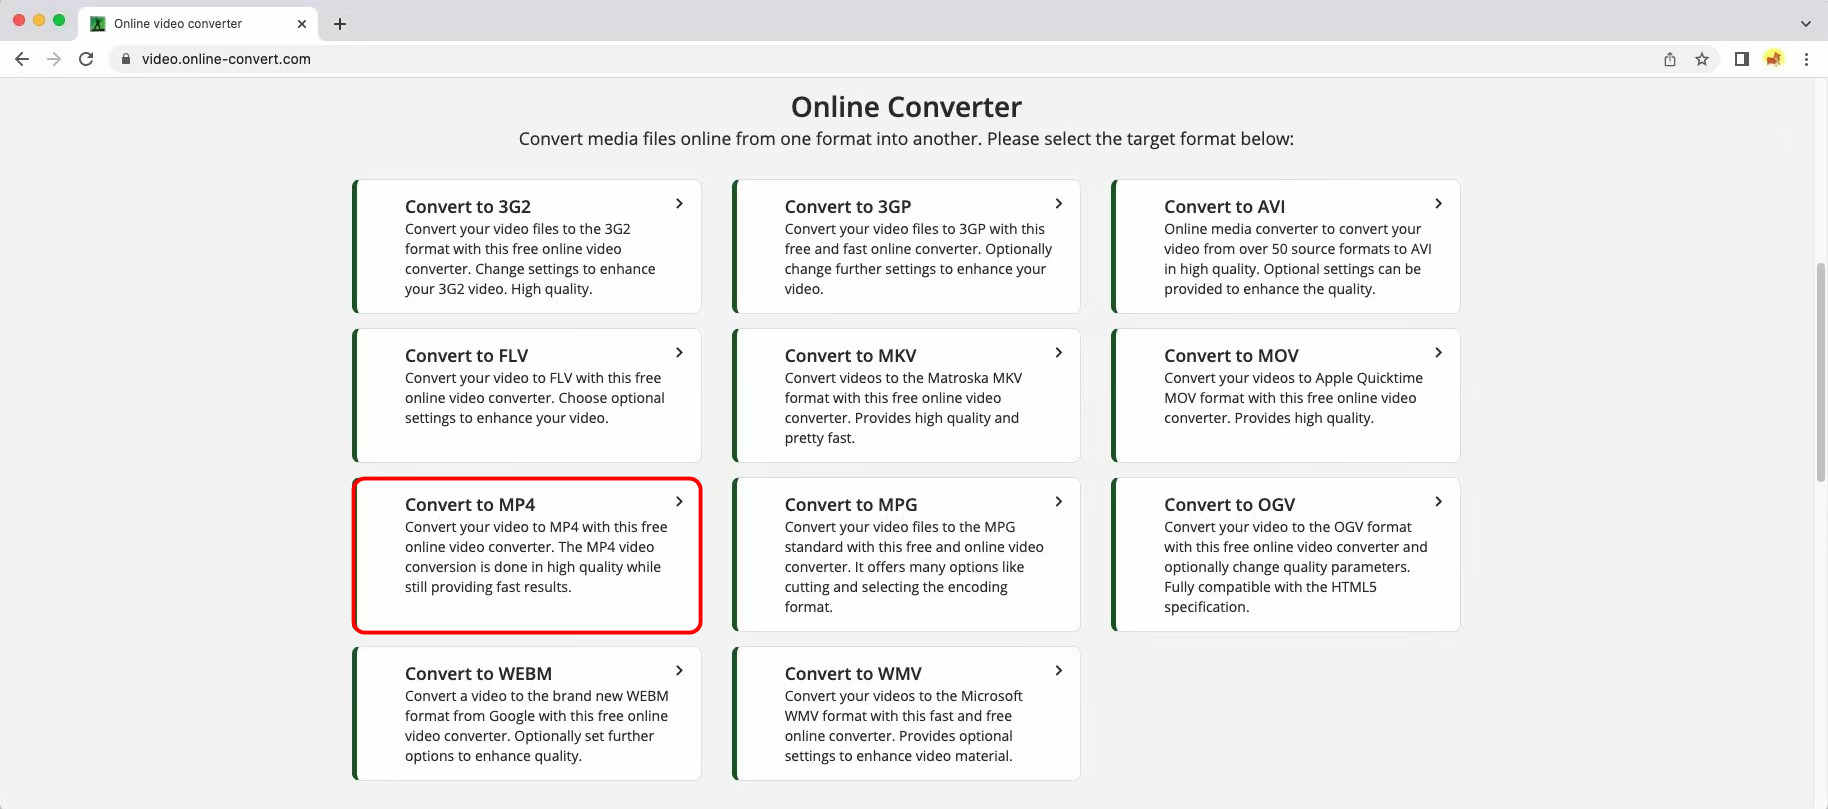 Hit the Convert Video to MP4 option online